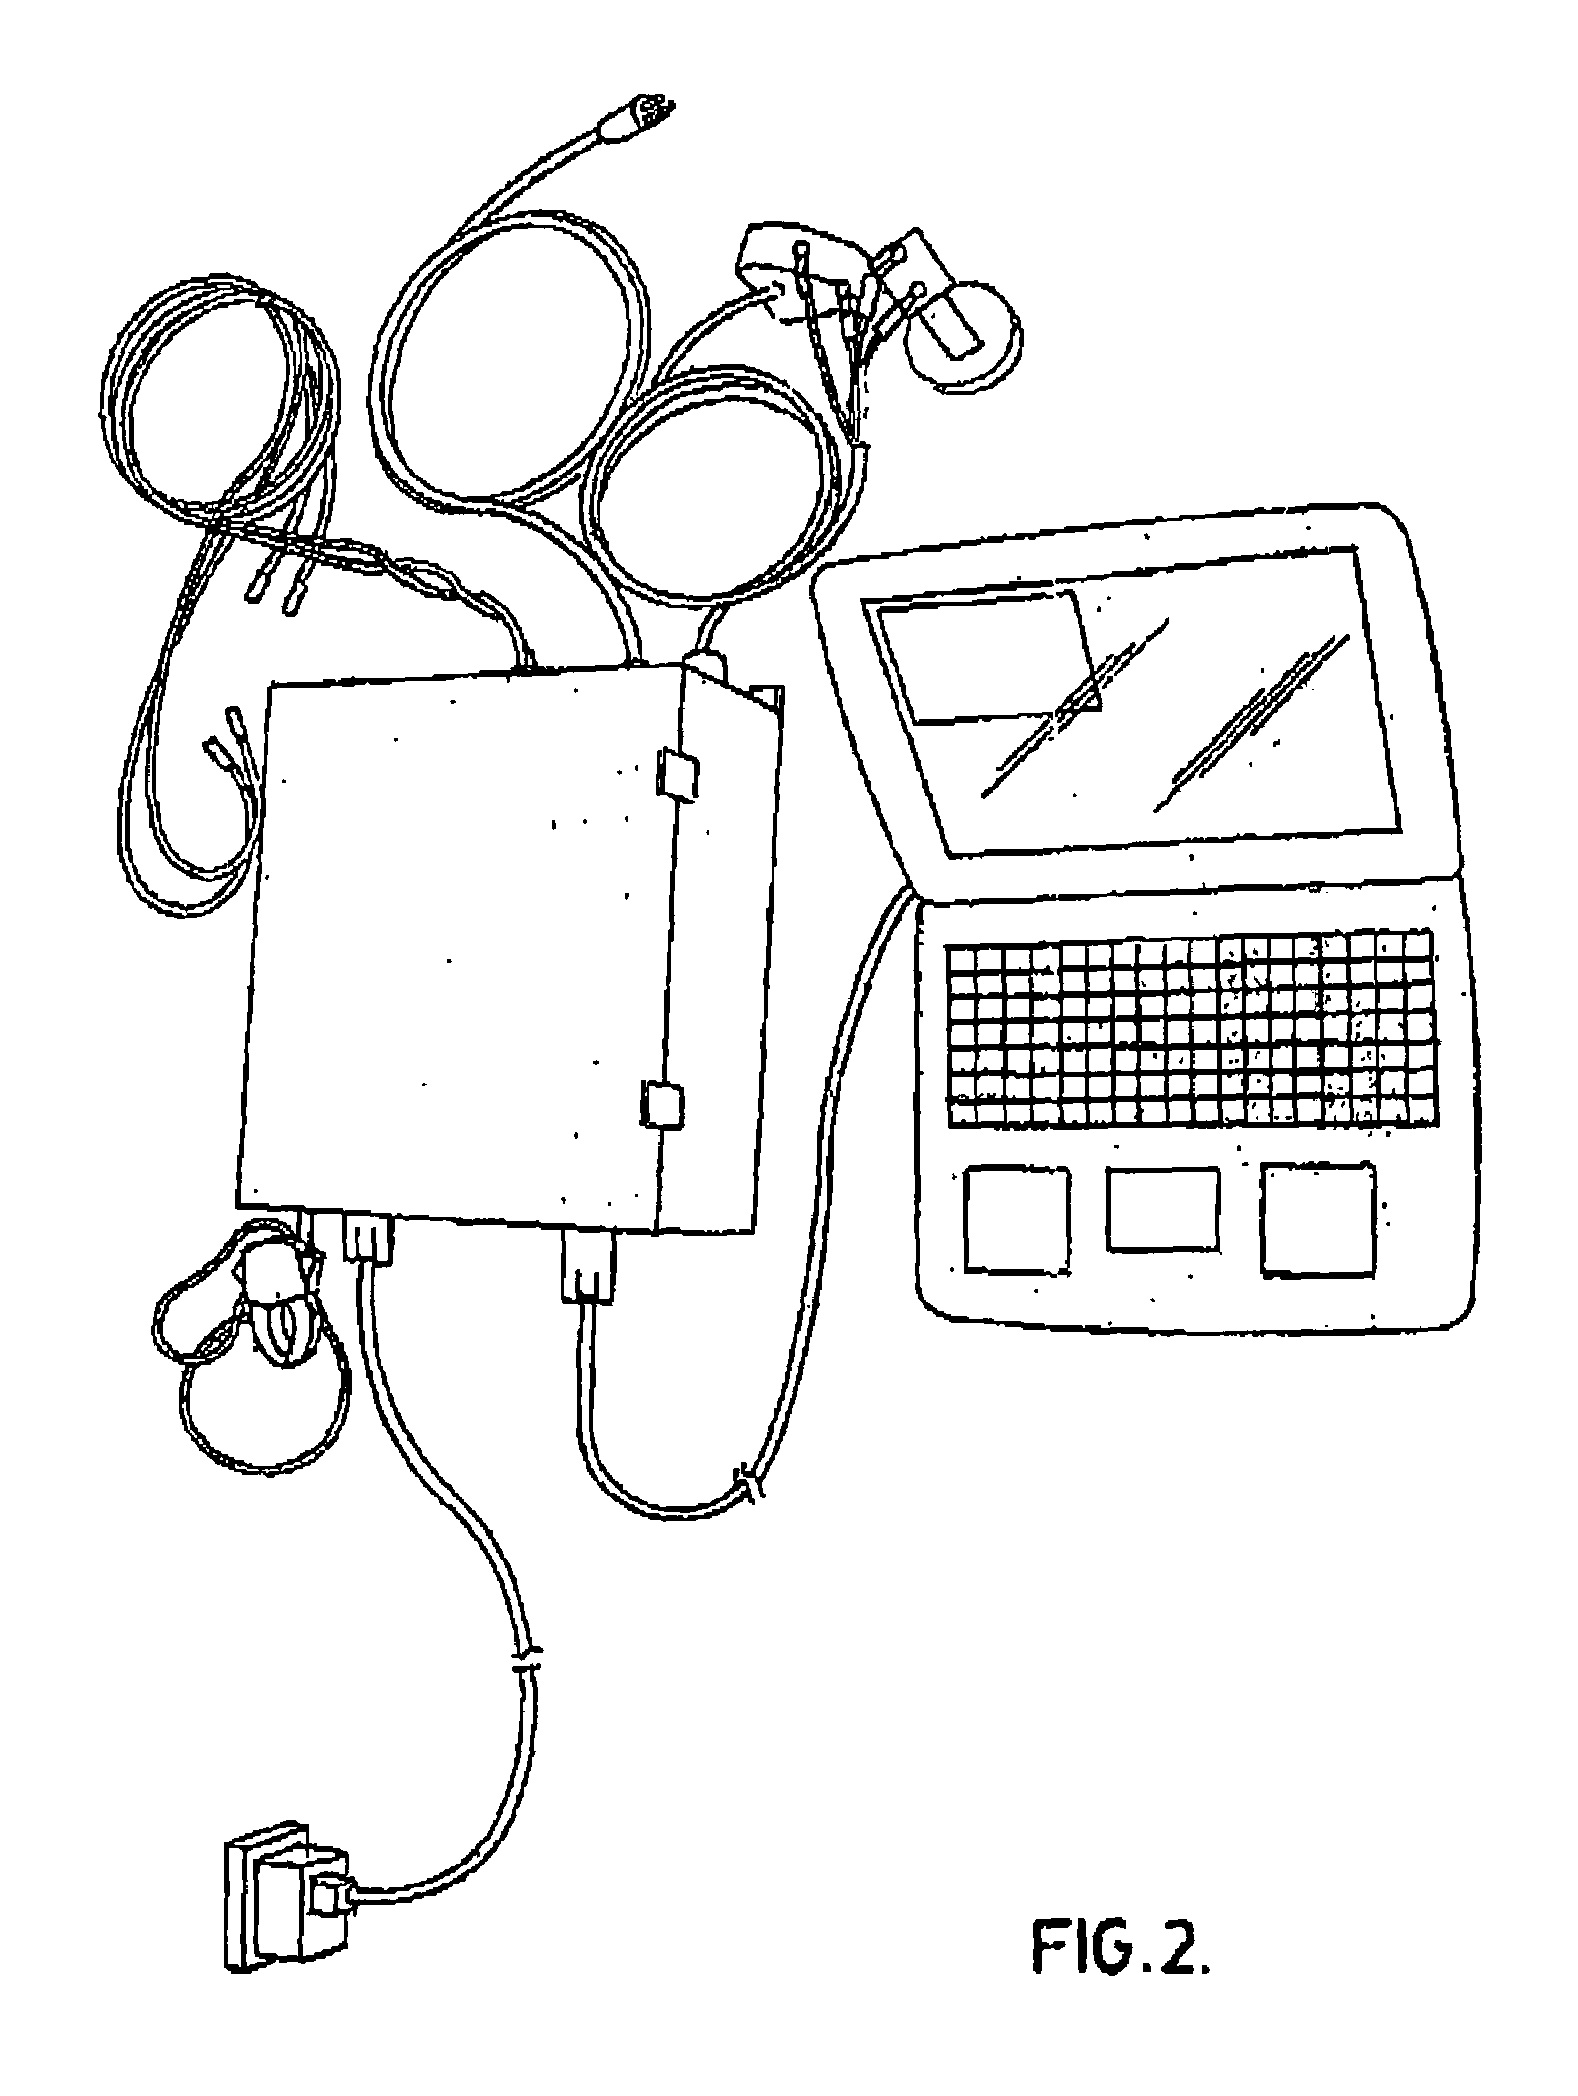 Method for assessing the operation of a conveying apparatus